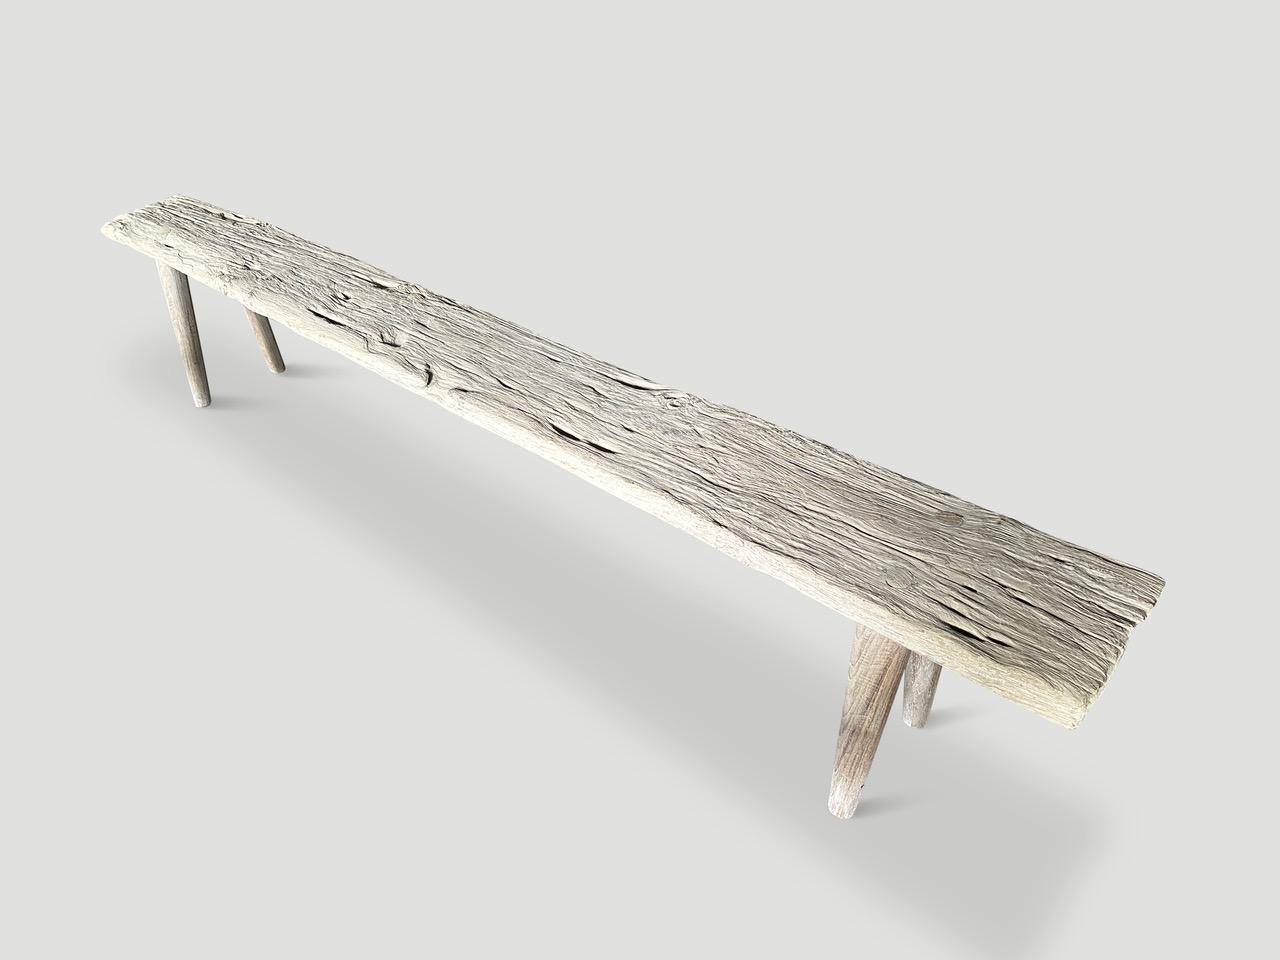 Antique Wabi Sabi bleached teak bench with unique natural wood character. We added smooth teak minimalist legs to this beautiful ancient wood panel. It’s all in the details.

The St. Barts Collection features an exciting line of organic white wash,